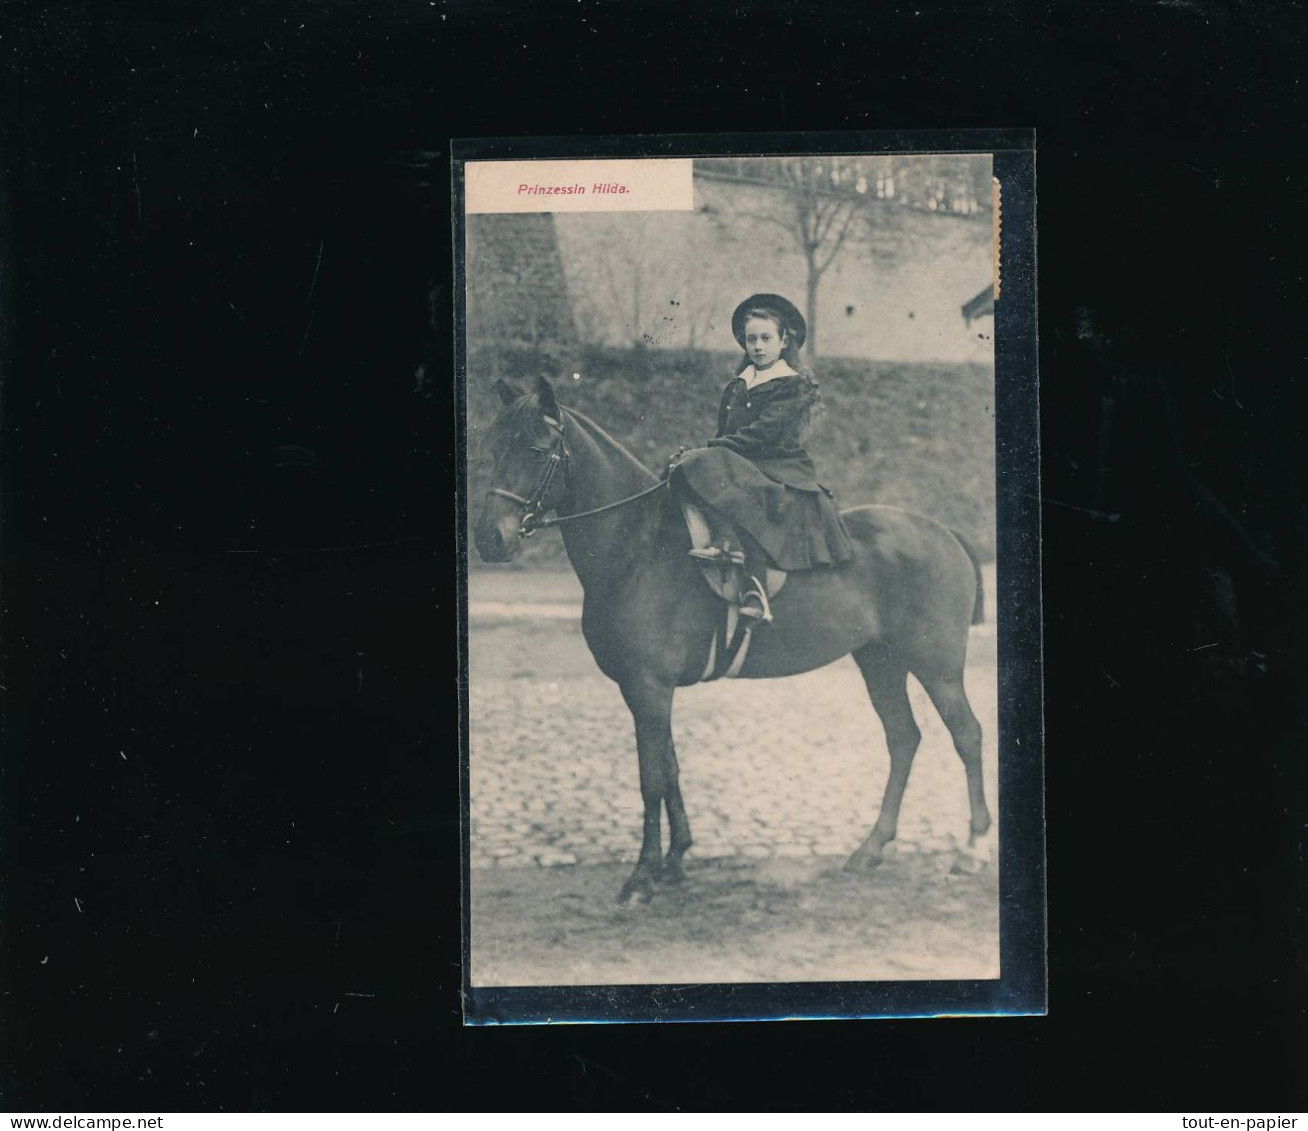 CPA -Prinzessin Hilda Von Luxemburg  Sur Cheval - Luxembourg - Grand-Ducal Family